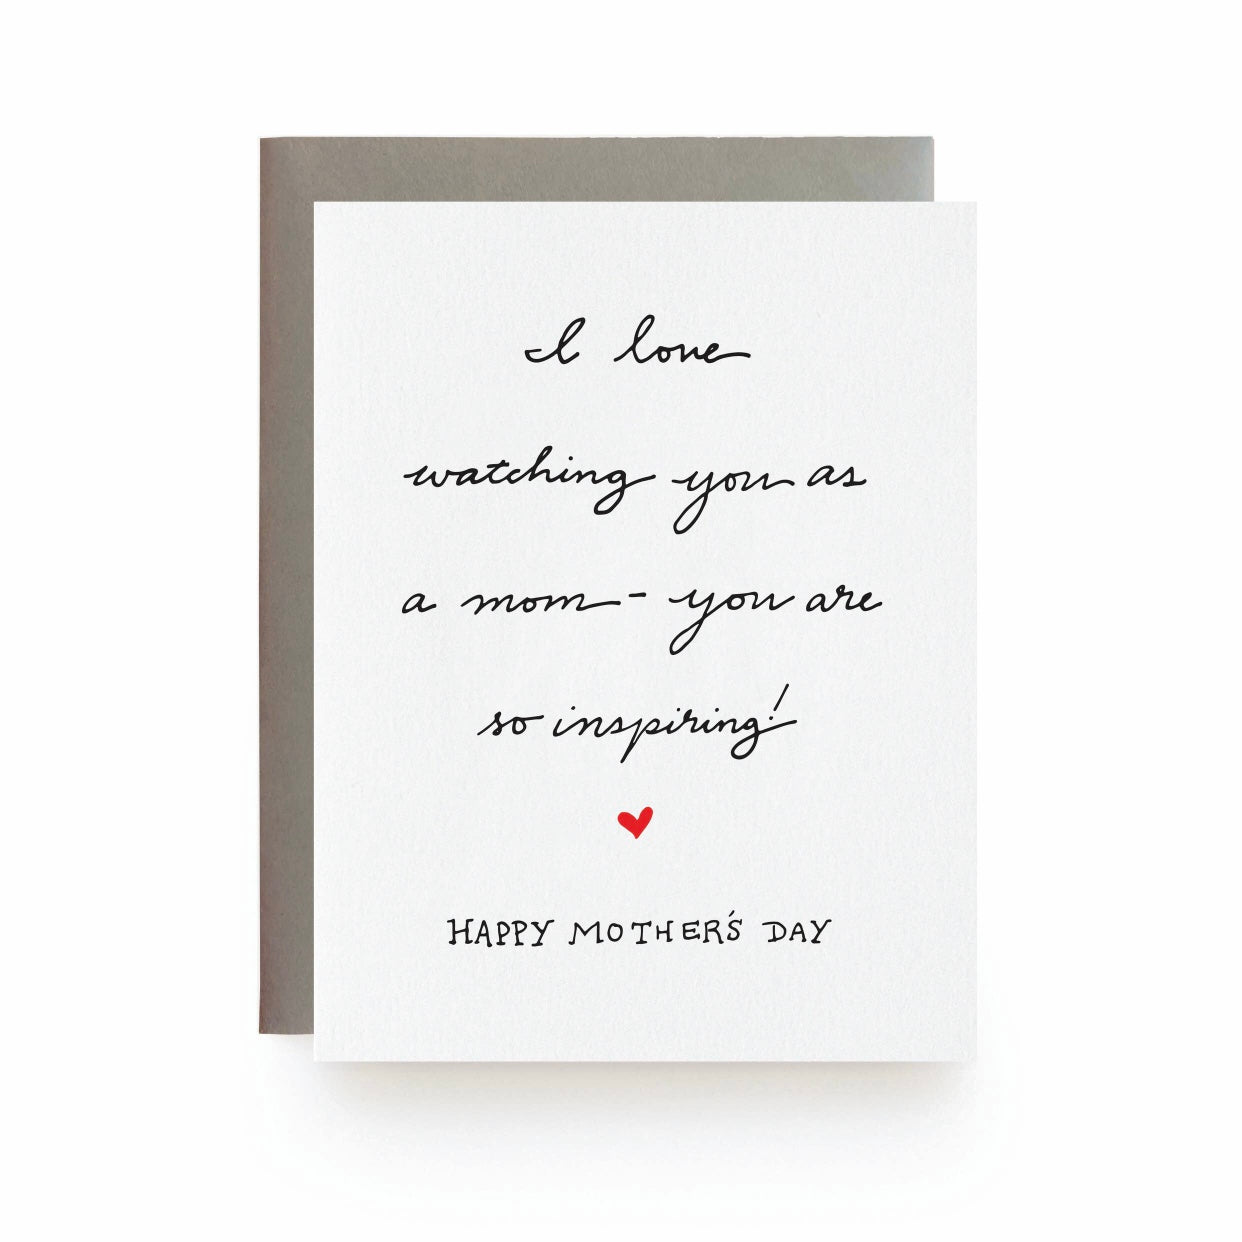 Inspiring mothers day card